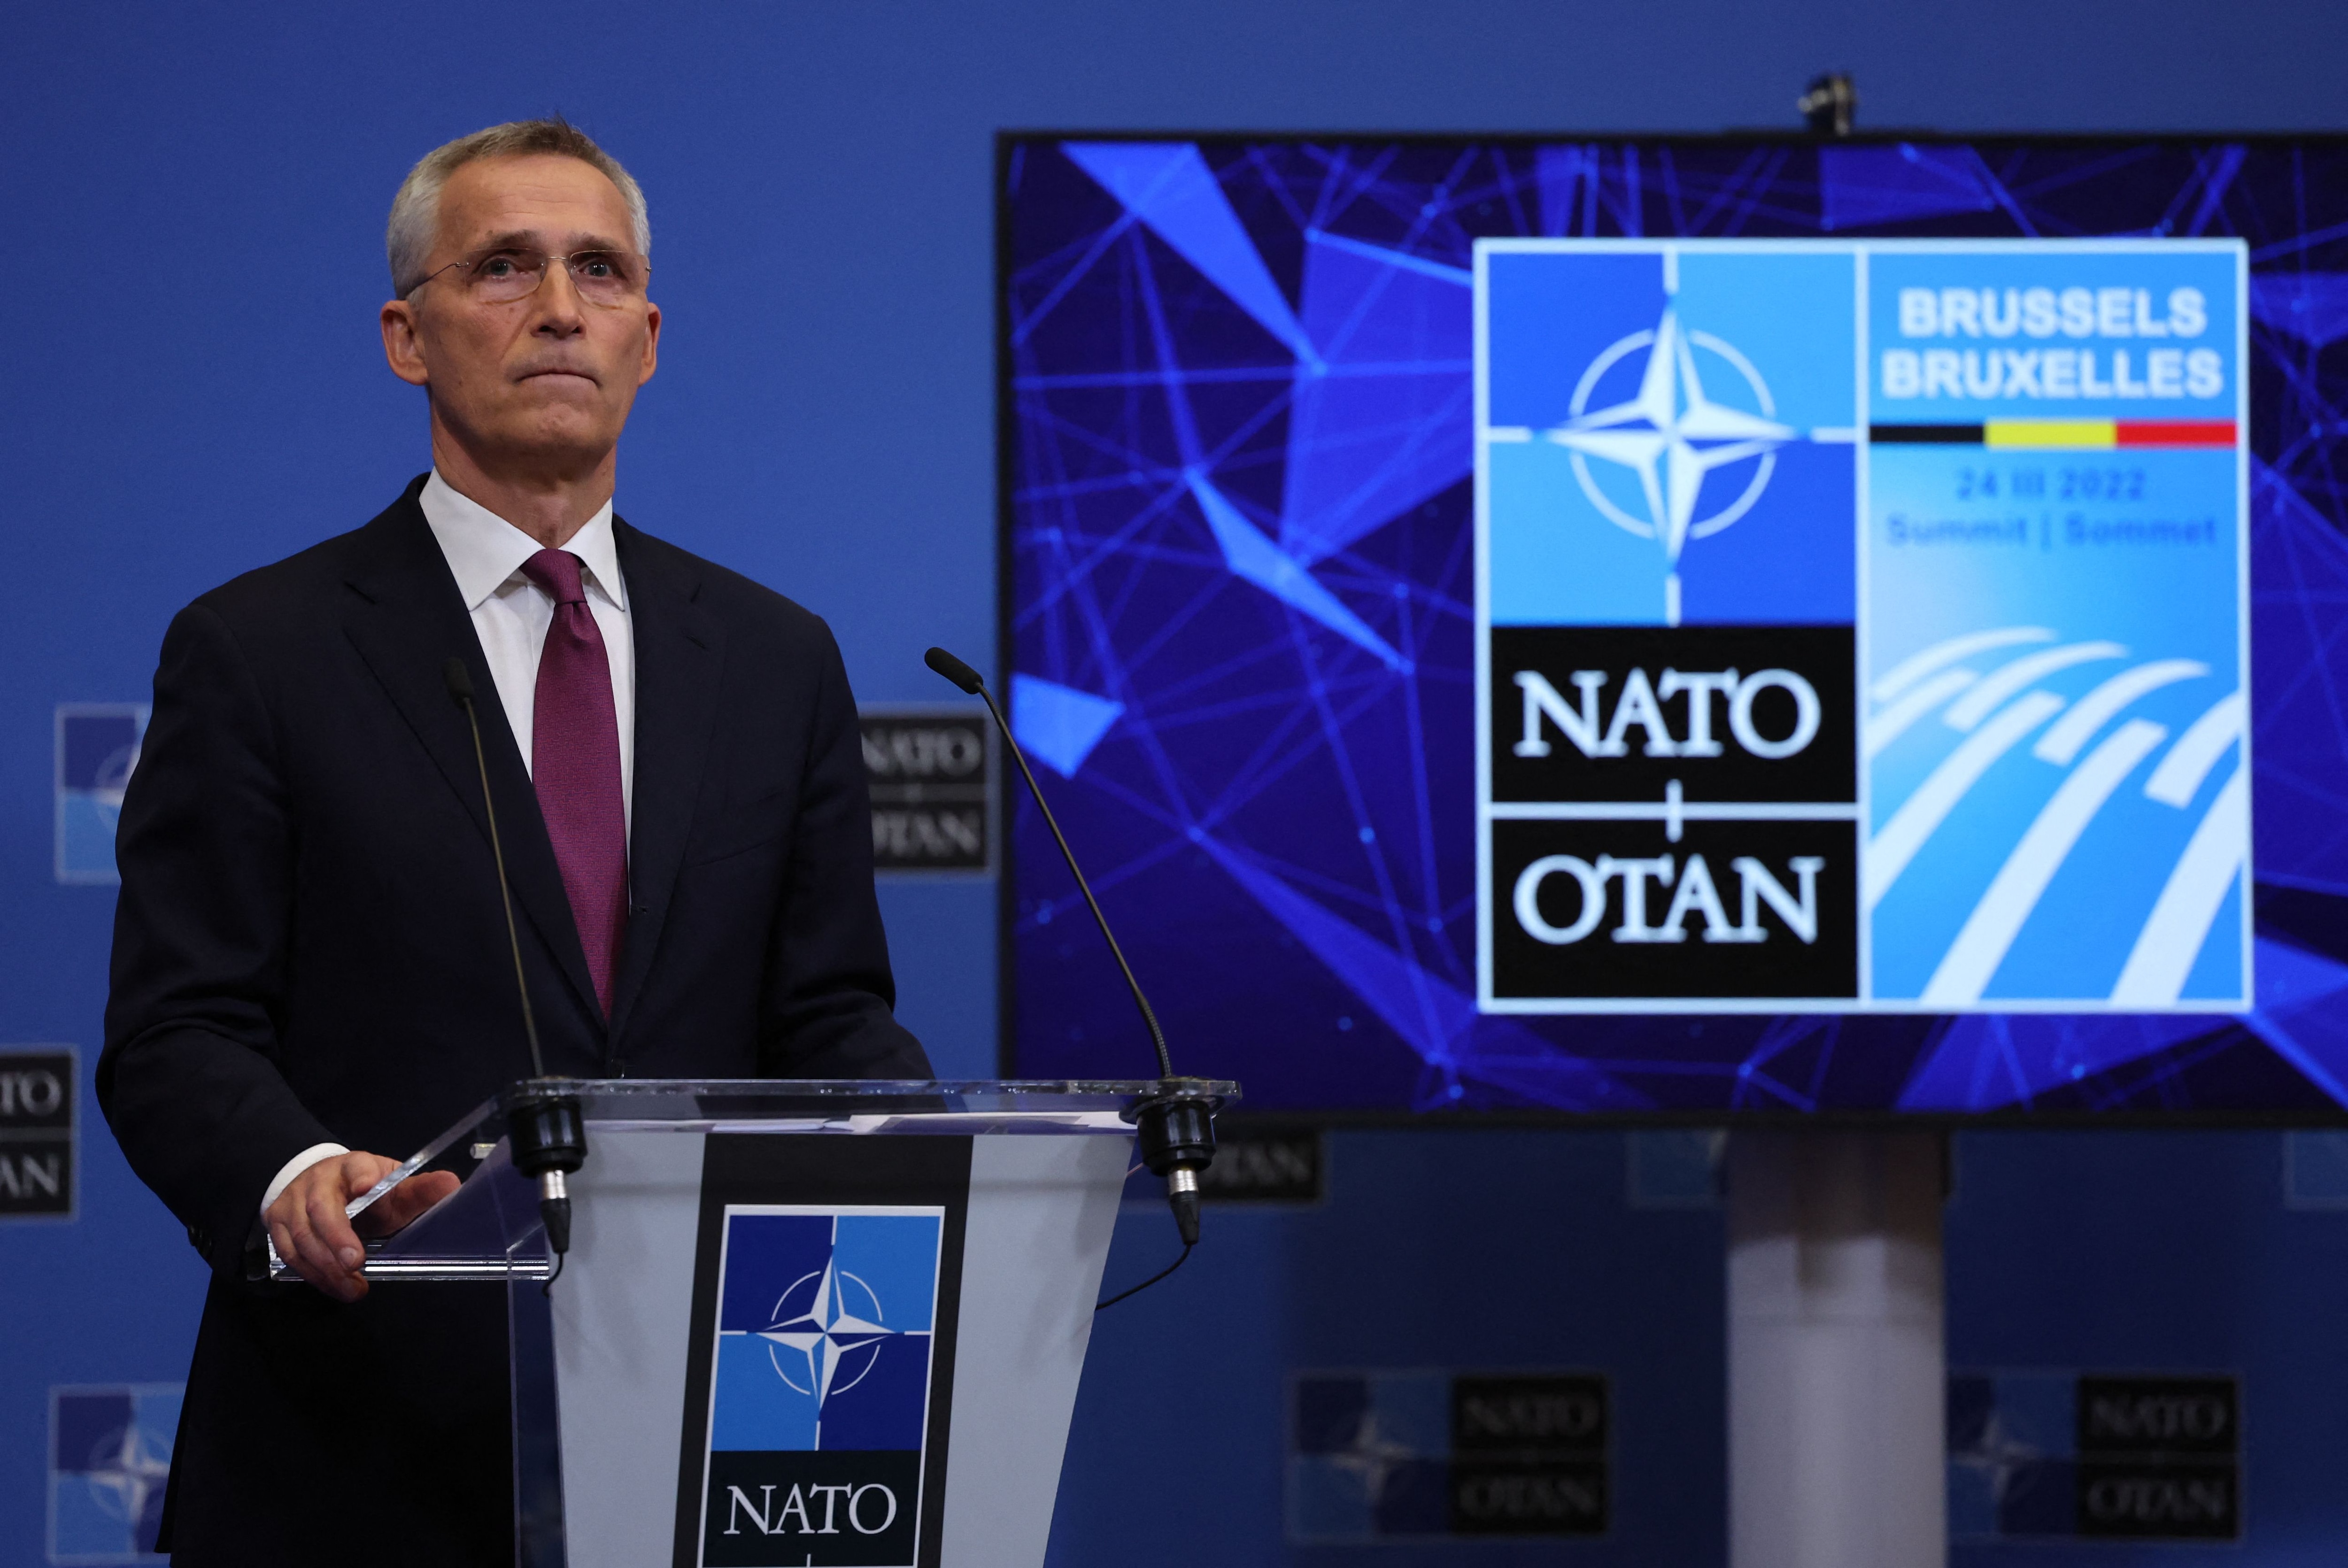 NATO Secretary General Jens Stoltenberg addresses a press conference at NATO Headquarters in Brussels on March 23, 2022. (Photo by Thomas COEX / AFP)